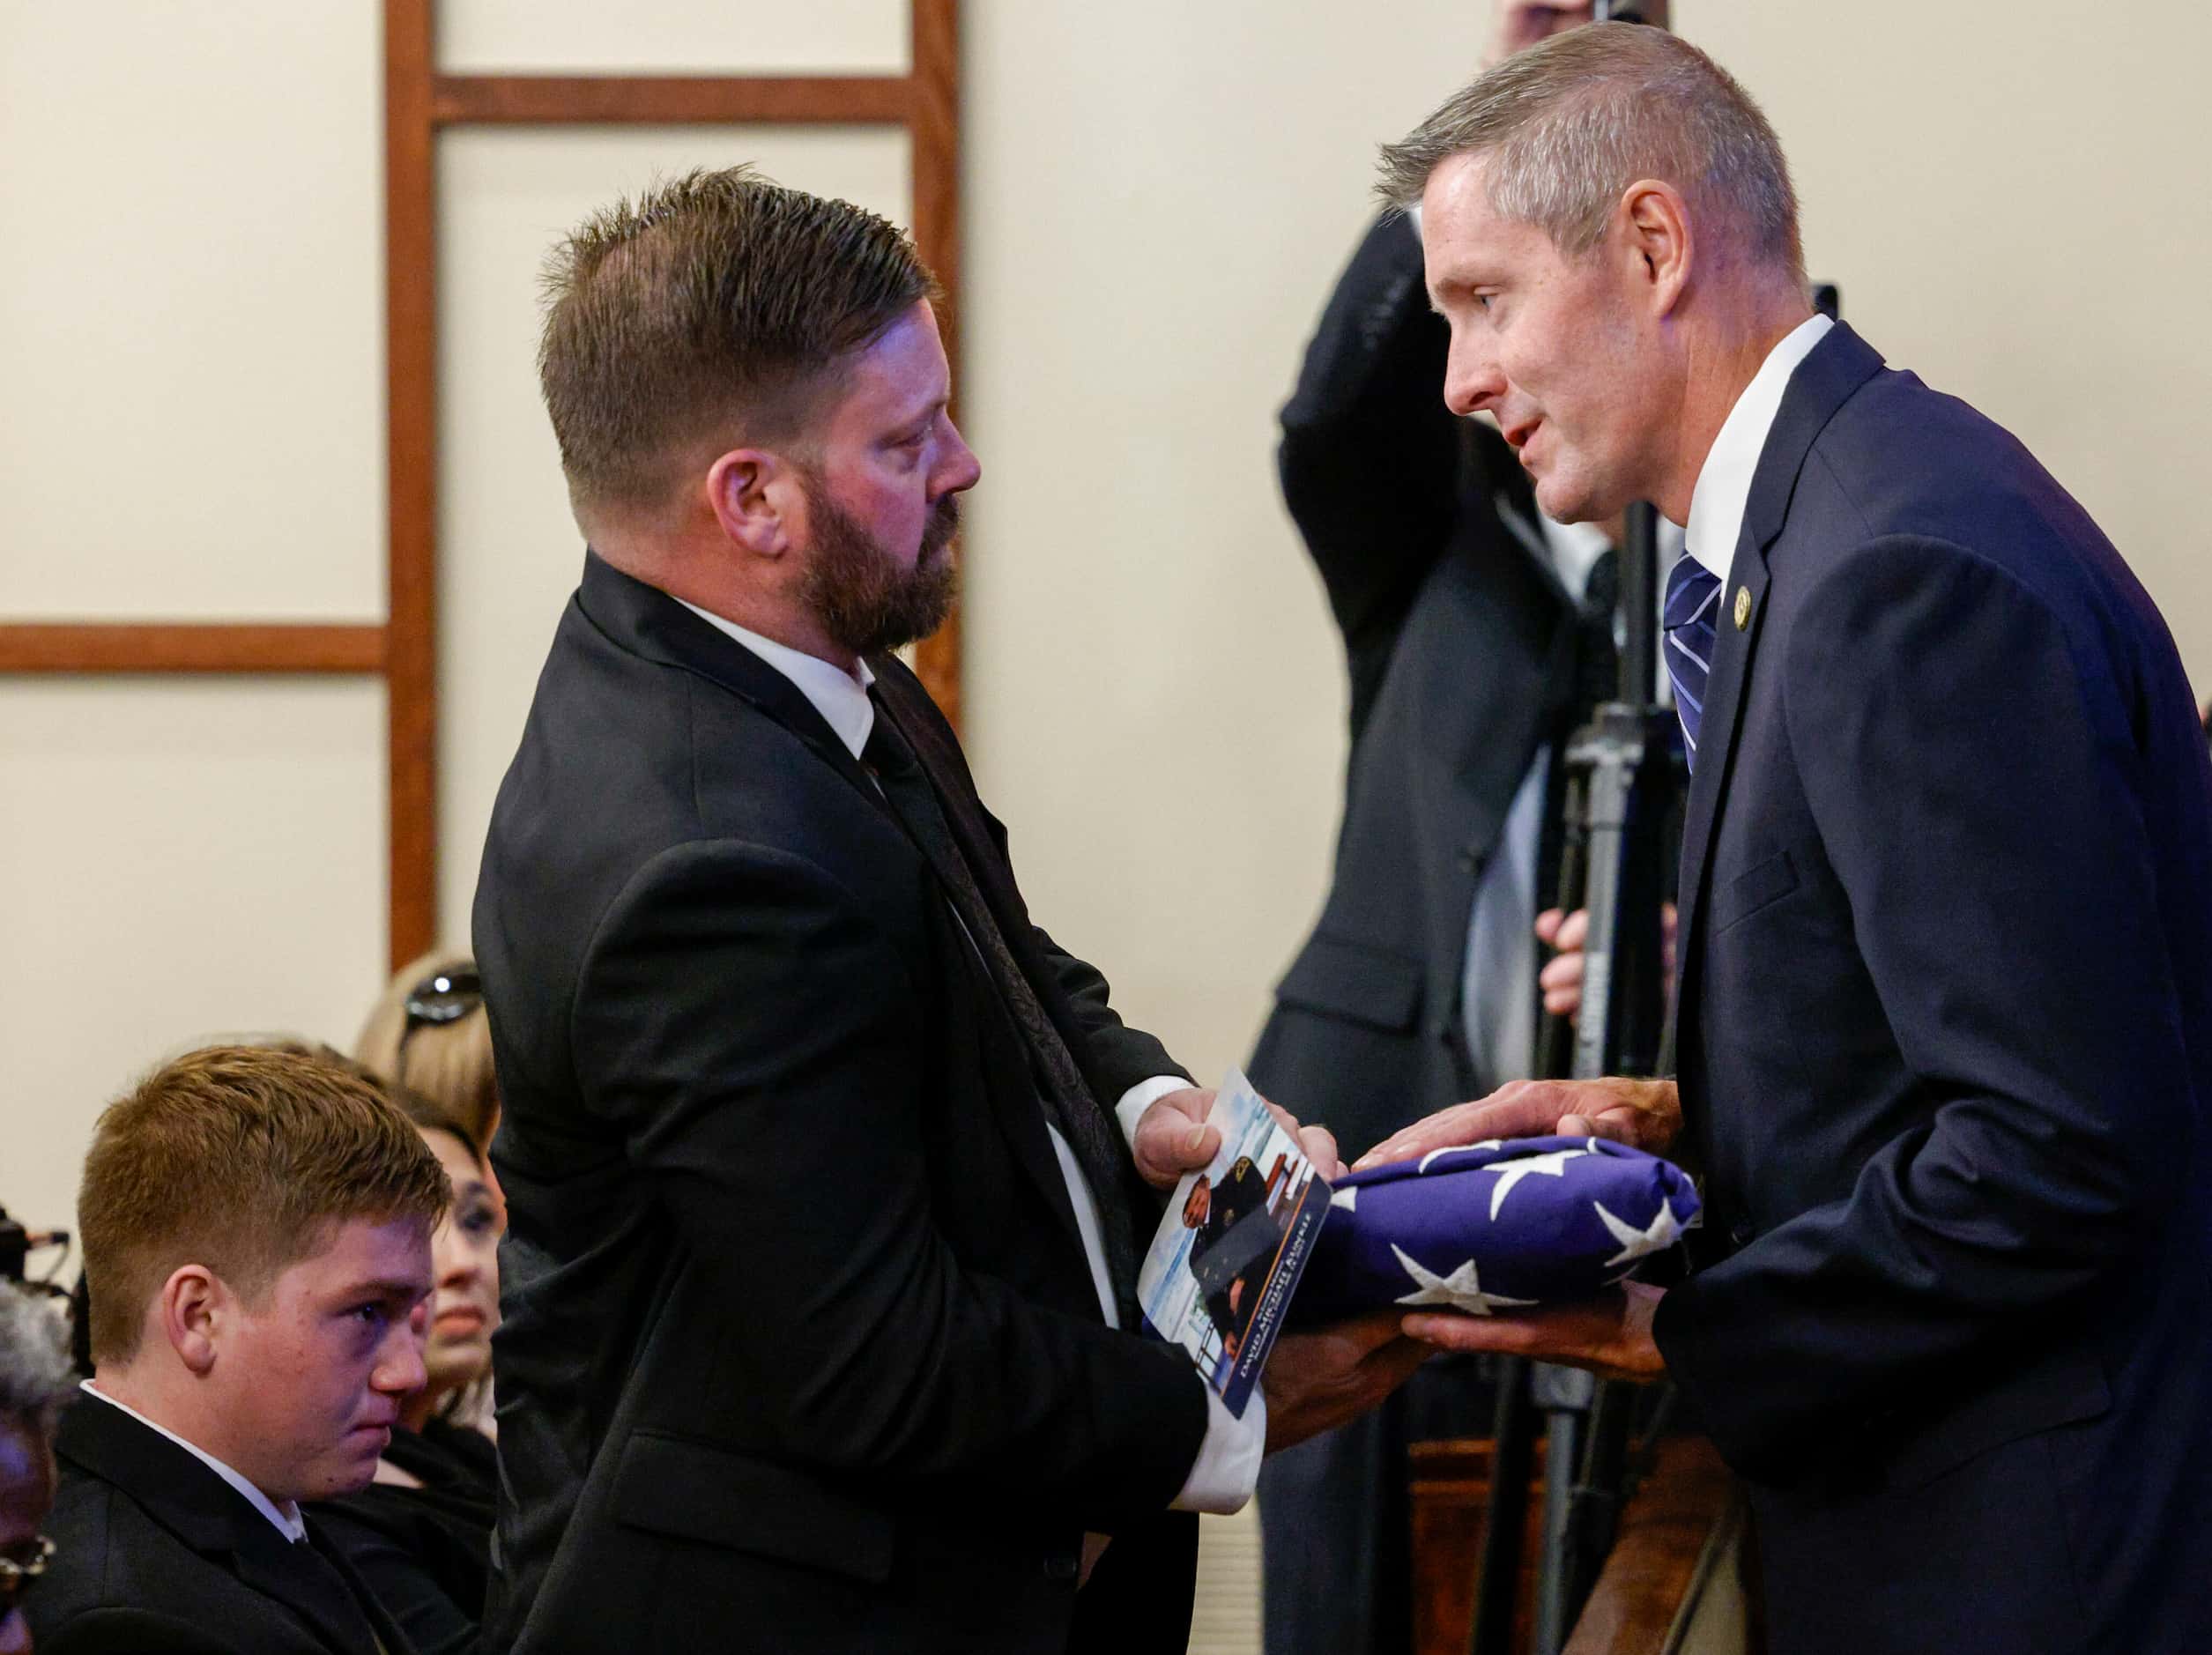 Dallas City Council member Chad West (right) presents a flag to David Kunkle’s son Michael...